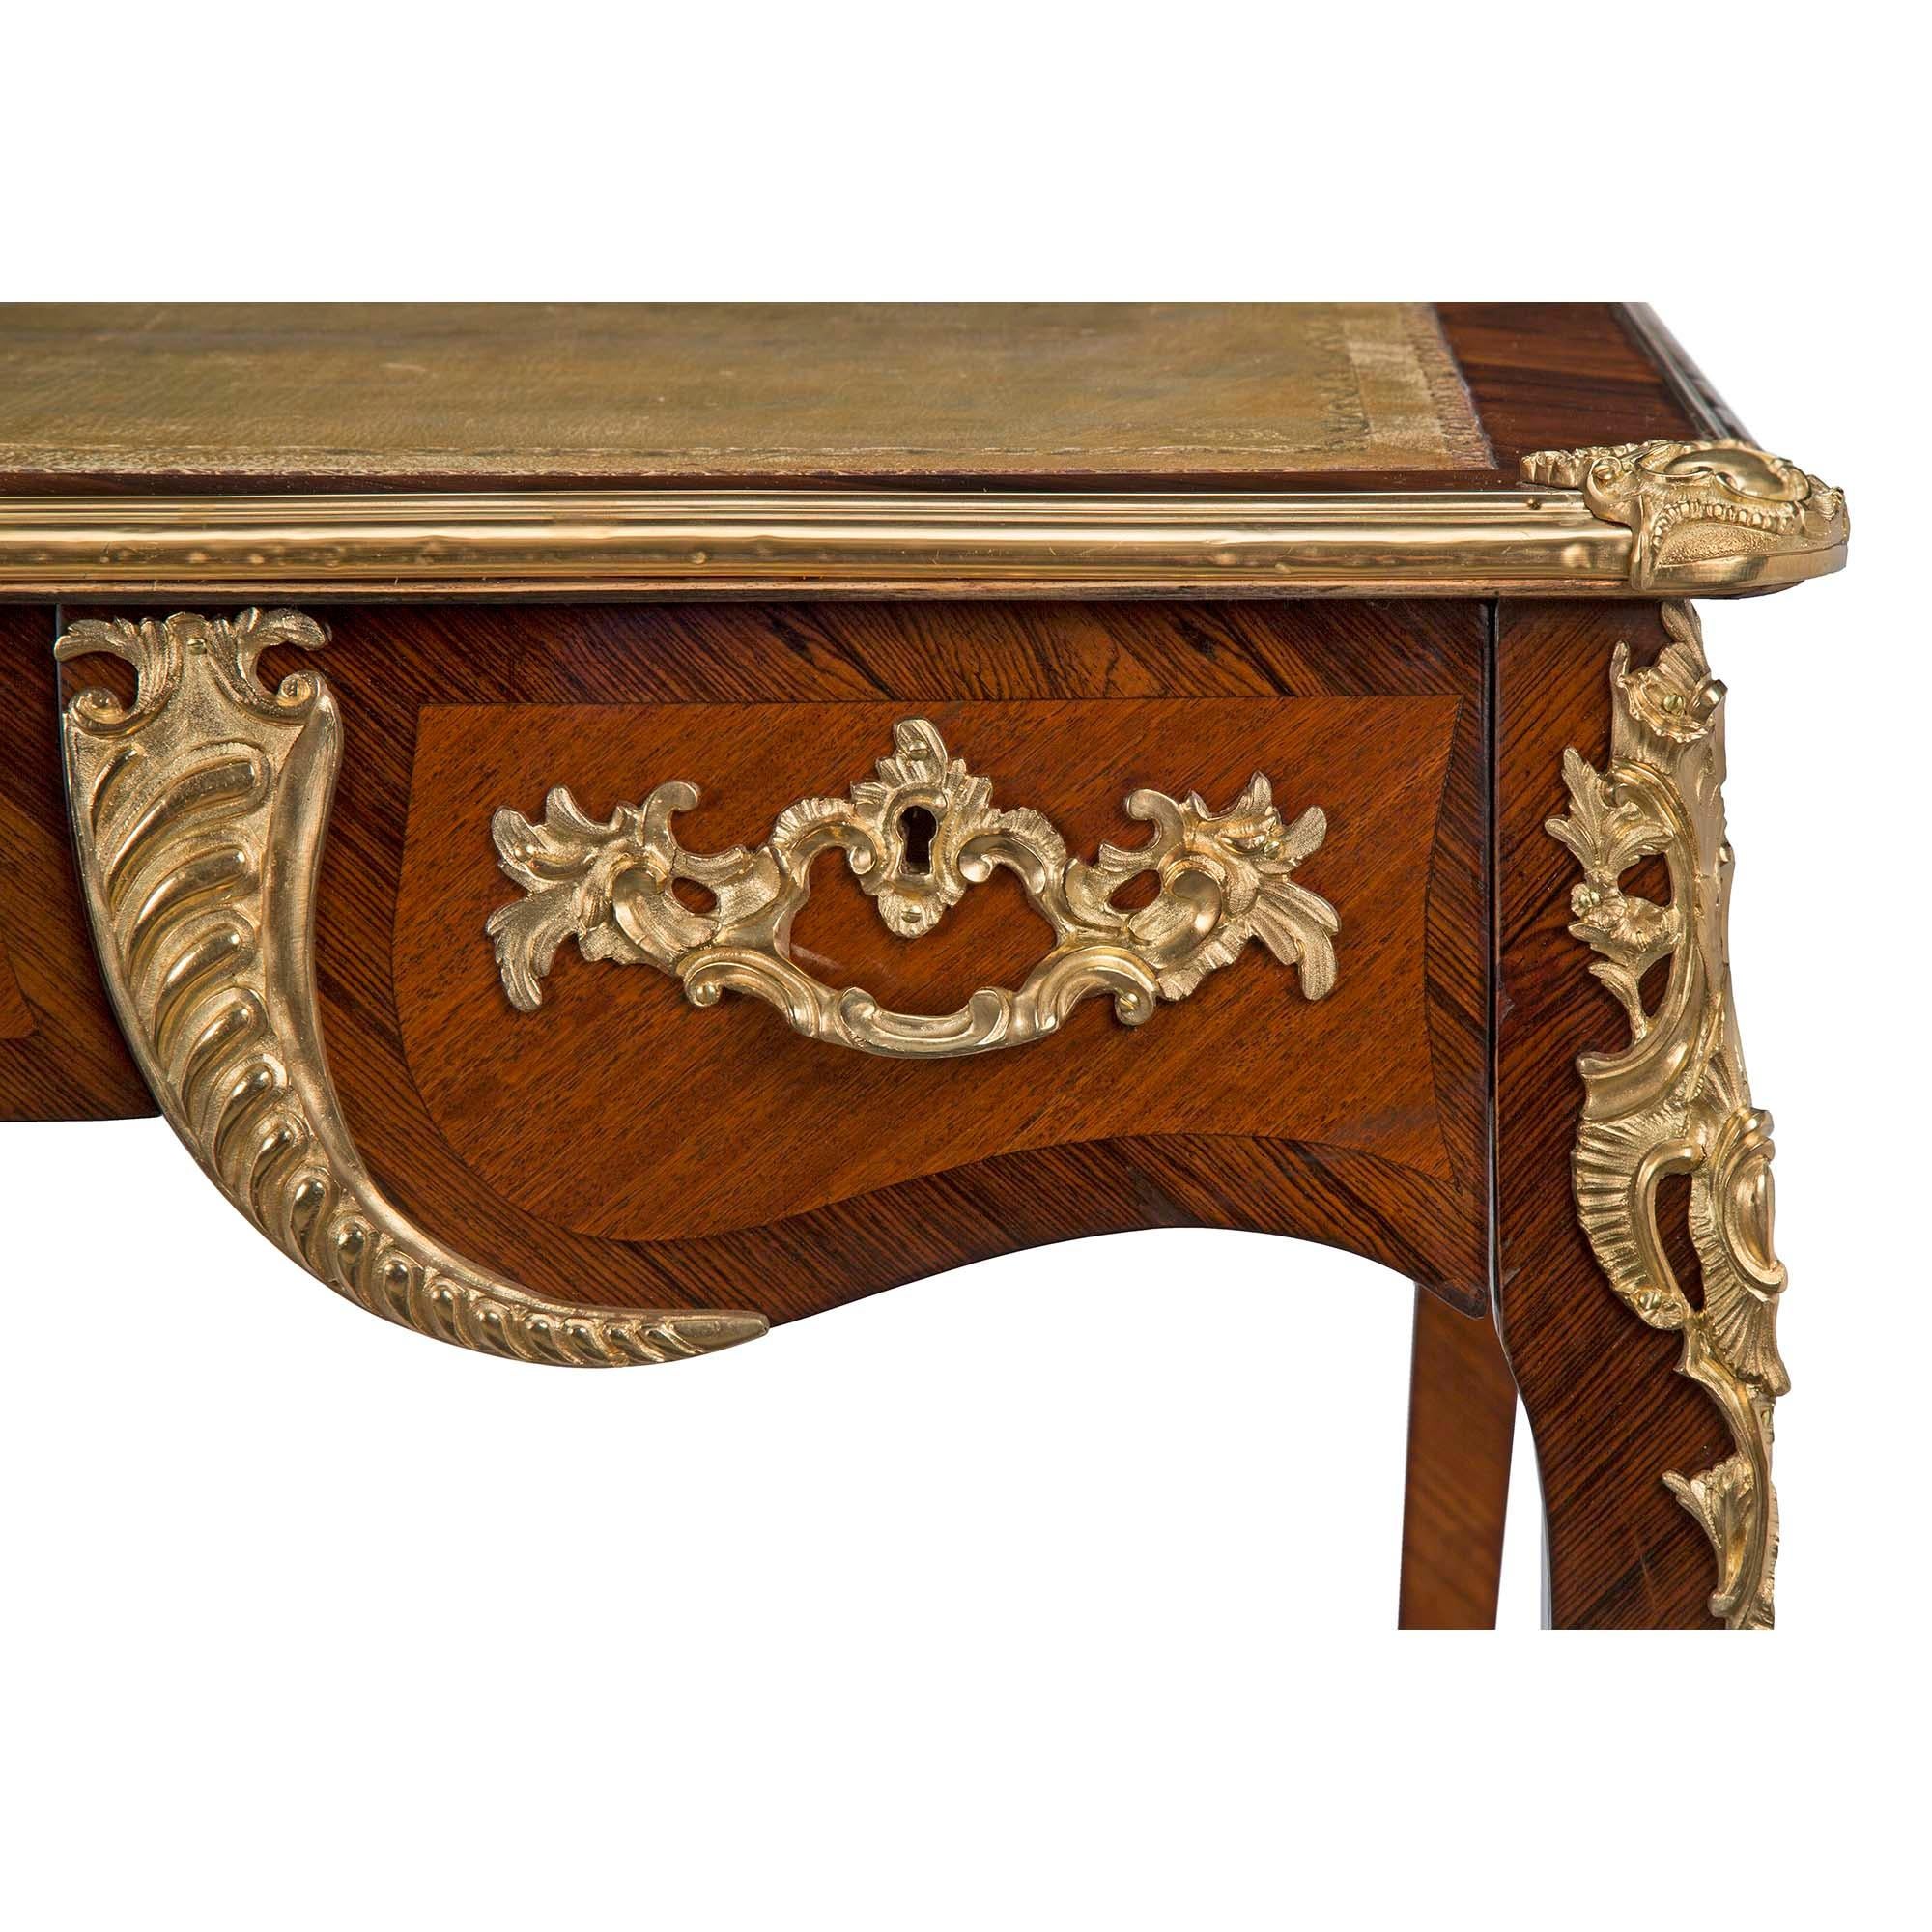 French Mid-19th Century Louis XV Style Tulipwood and Kingwood Bureau Plat For Sale 3